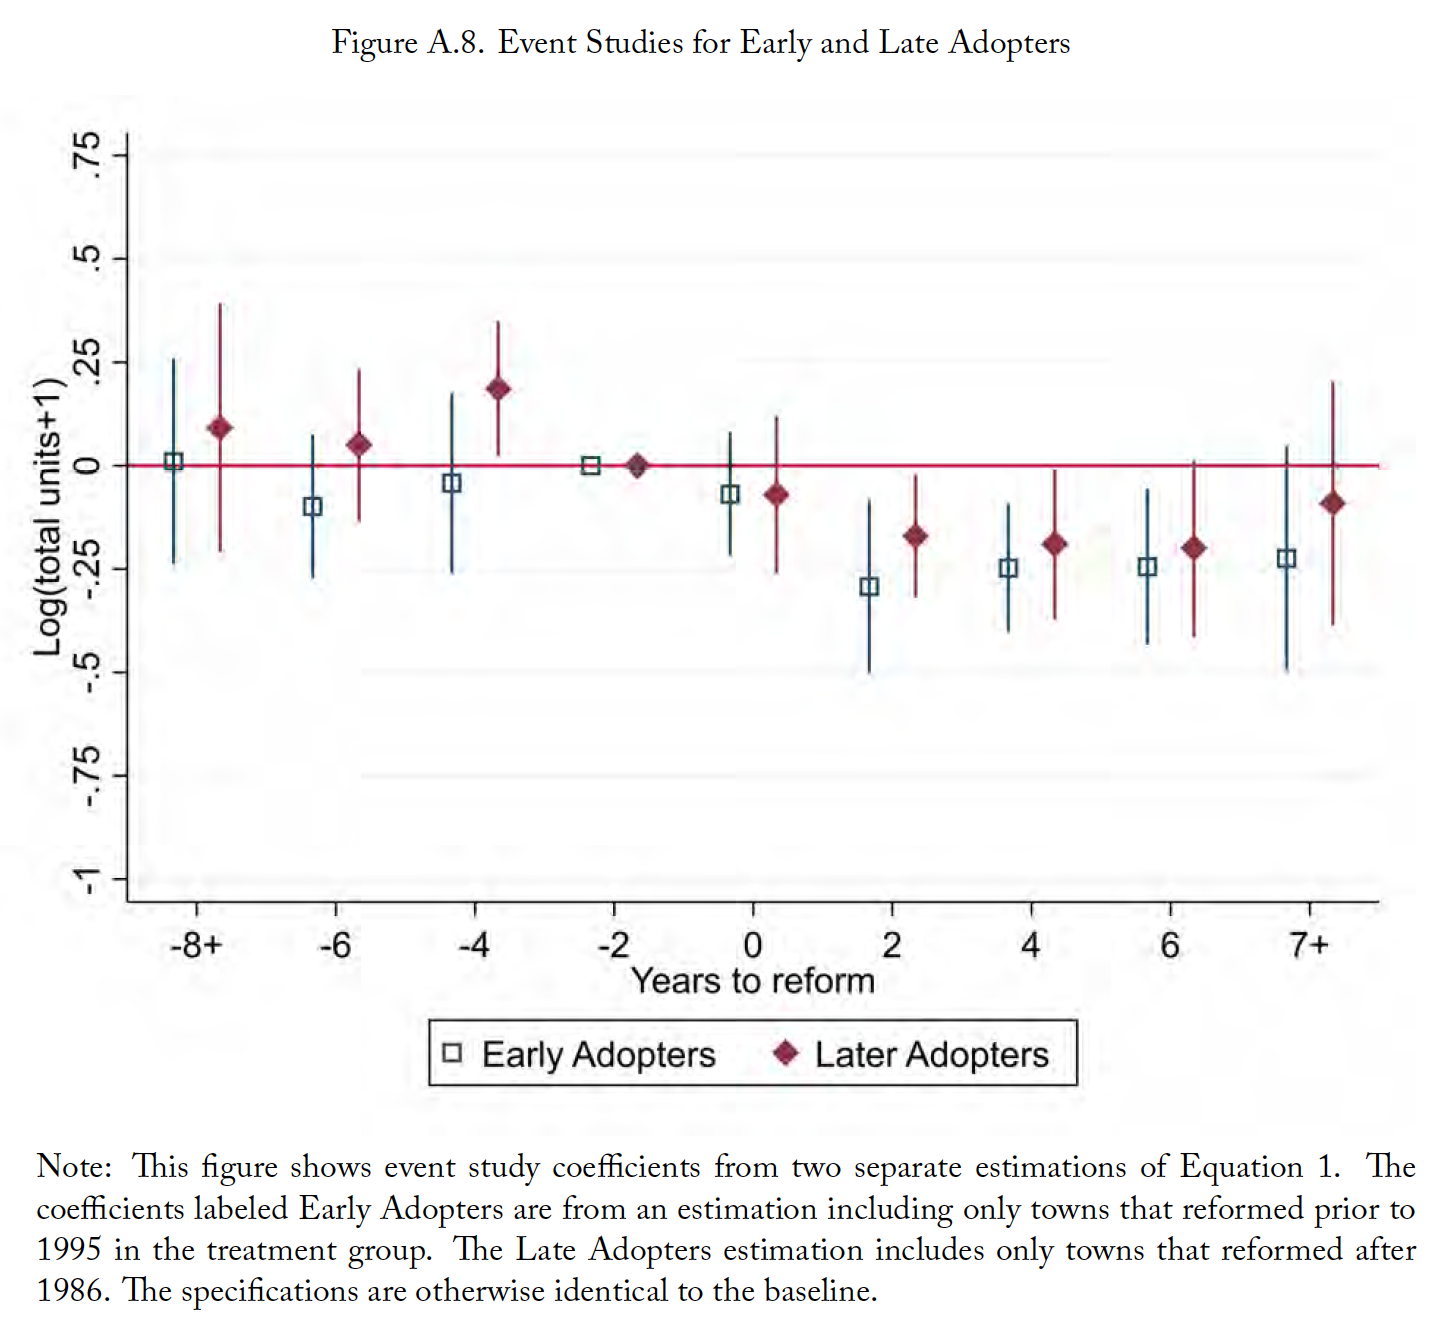 Figure A.8. Event Studies for Early and Late Adopters